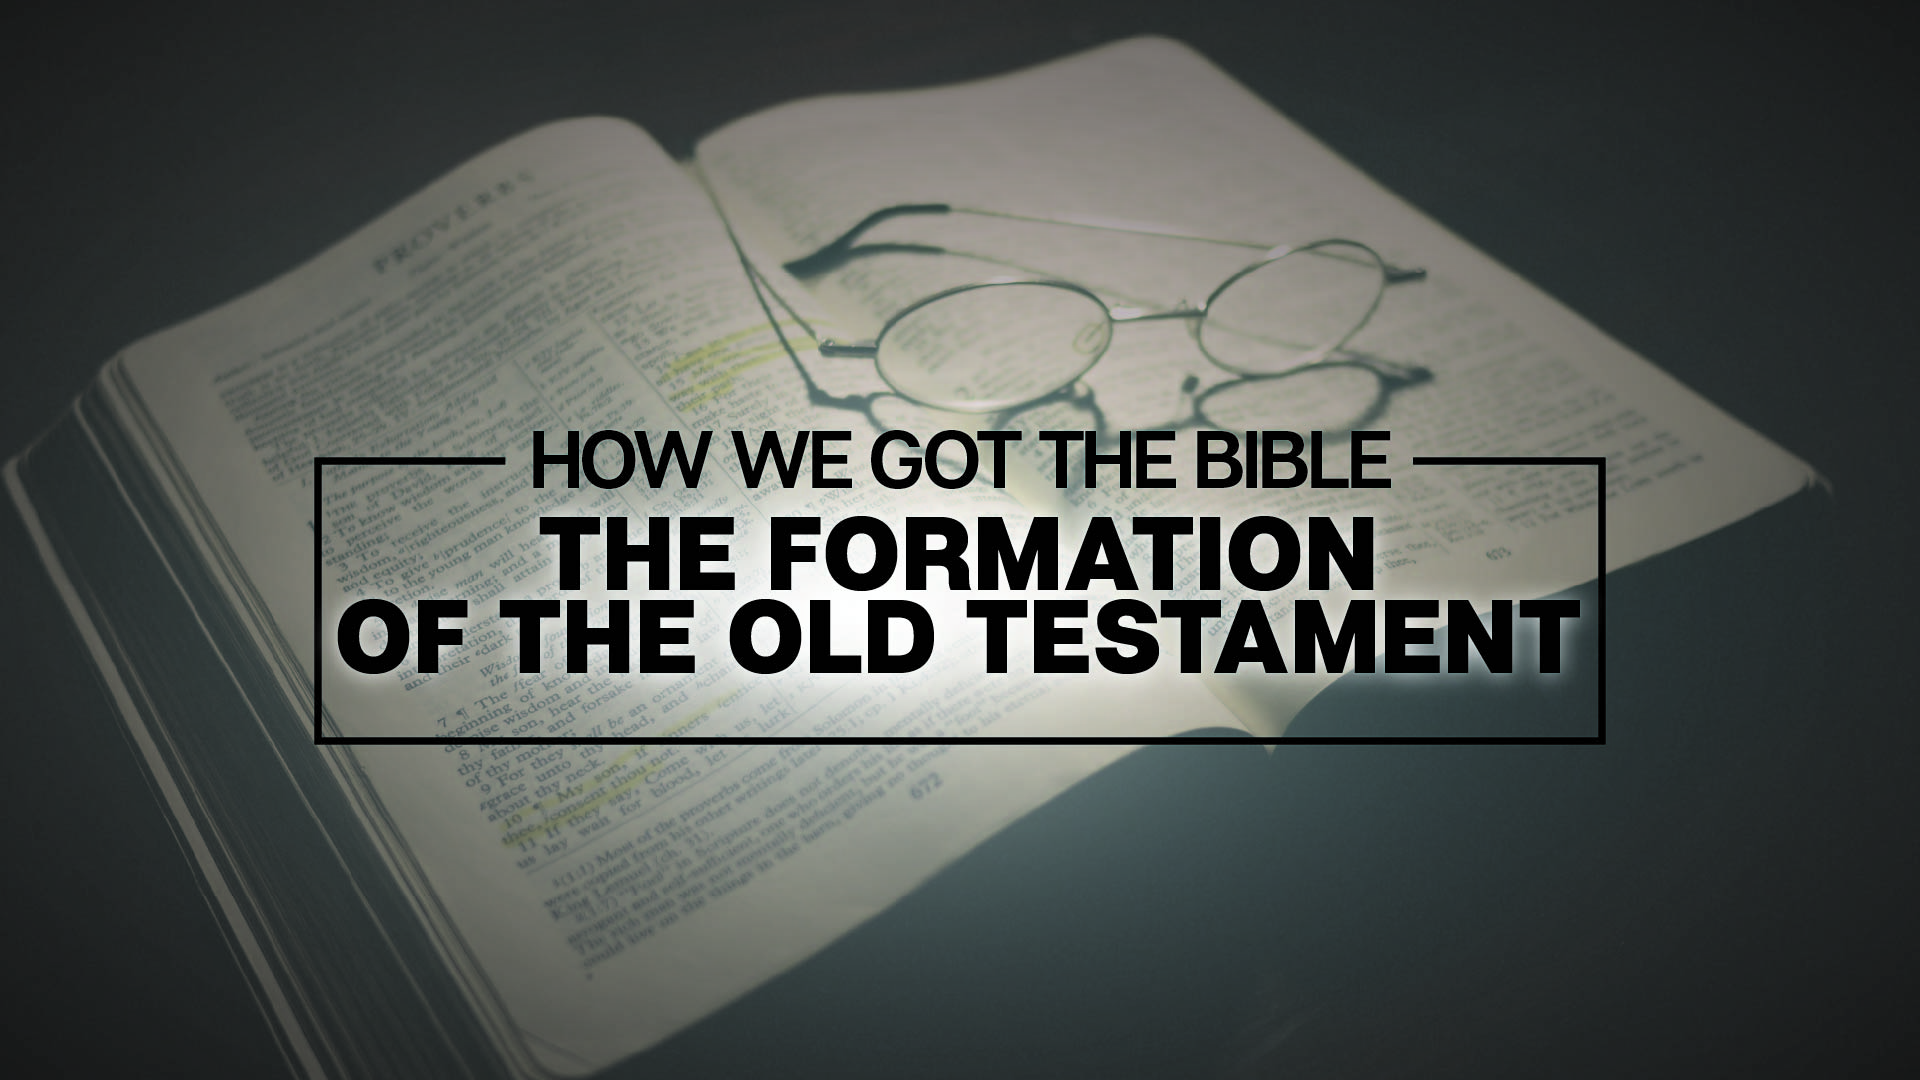 How We Got The Bible: The Old Testament